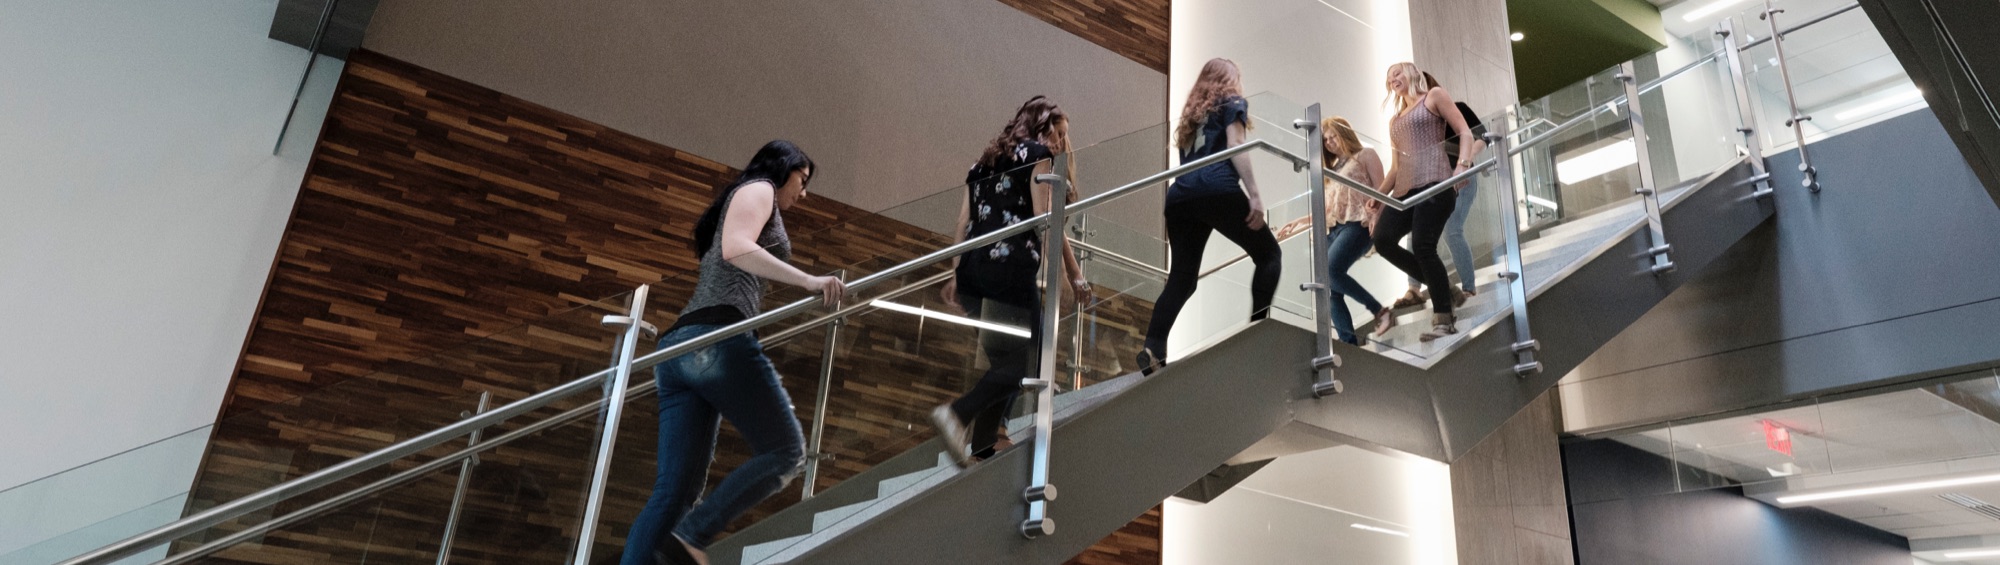 Students on stairs on campus